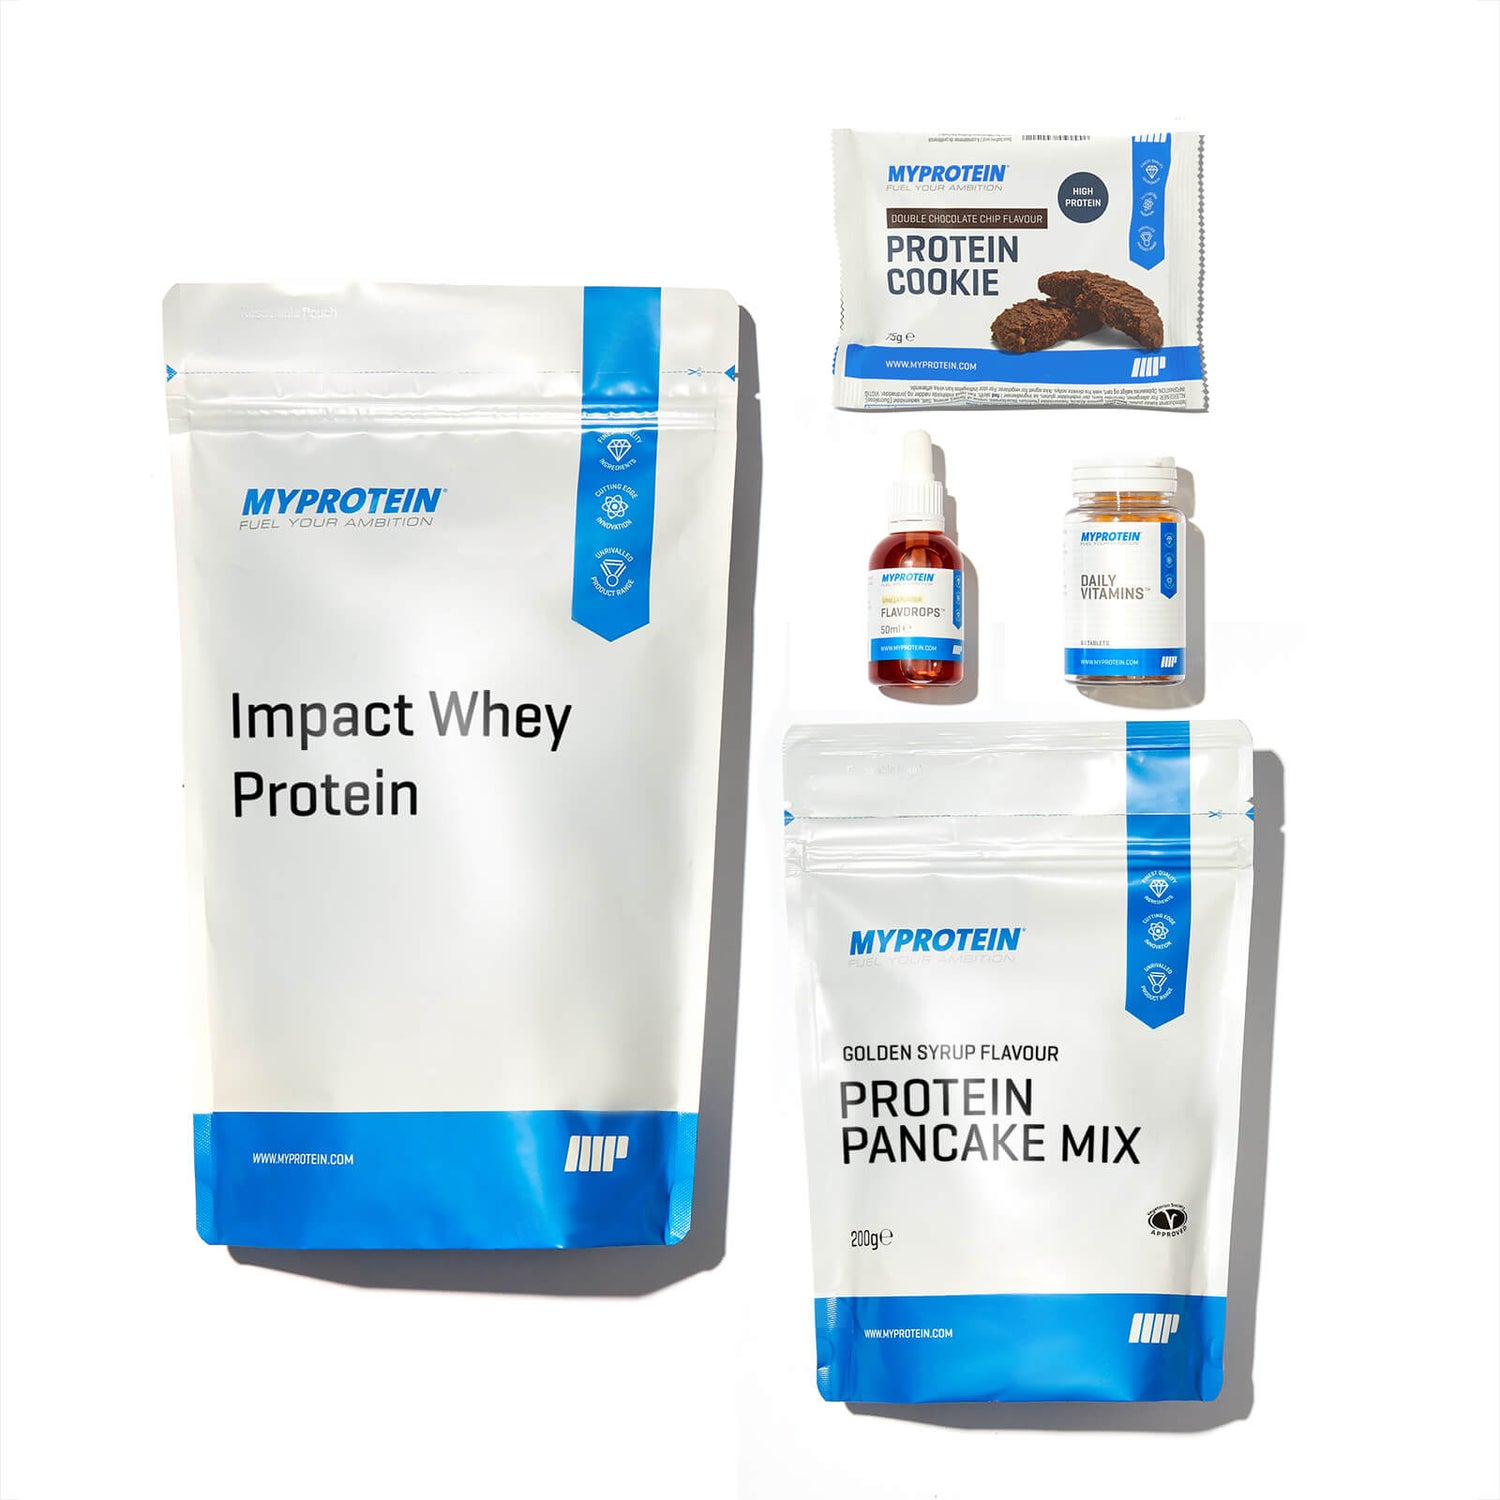 Myprotein App Weight Loss Bundle - Double Chocolate - White Chocolate - Cookies and Cream